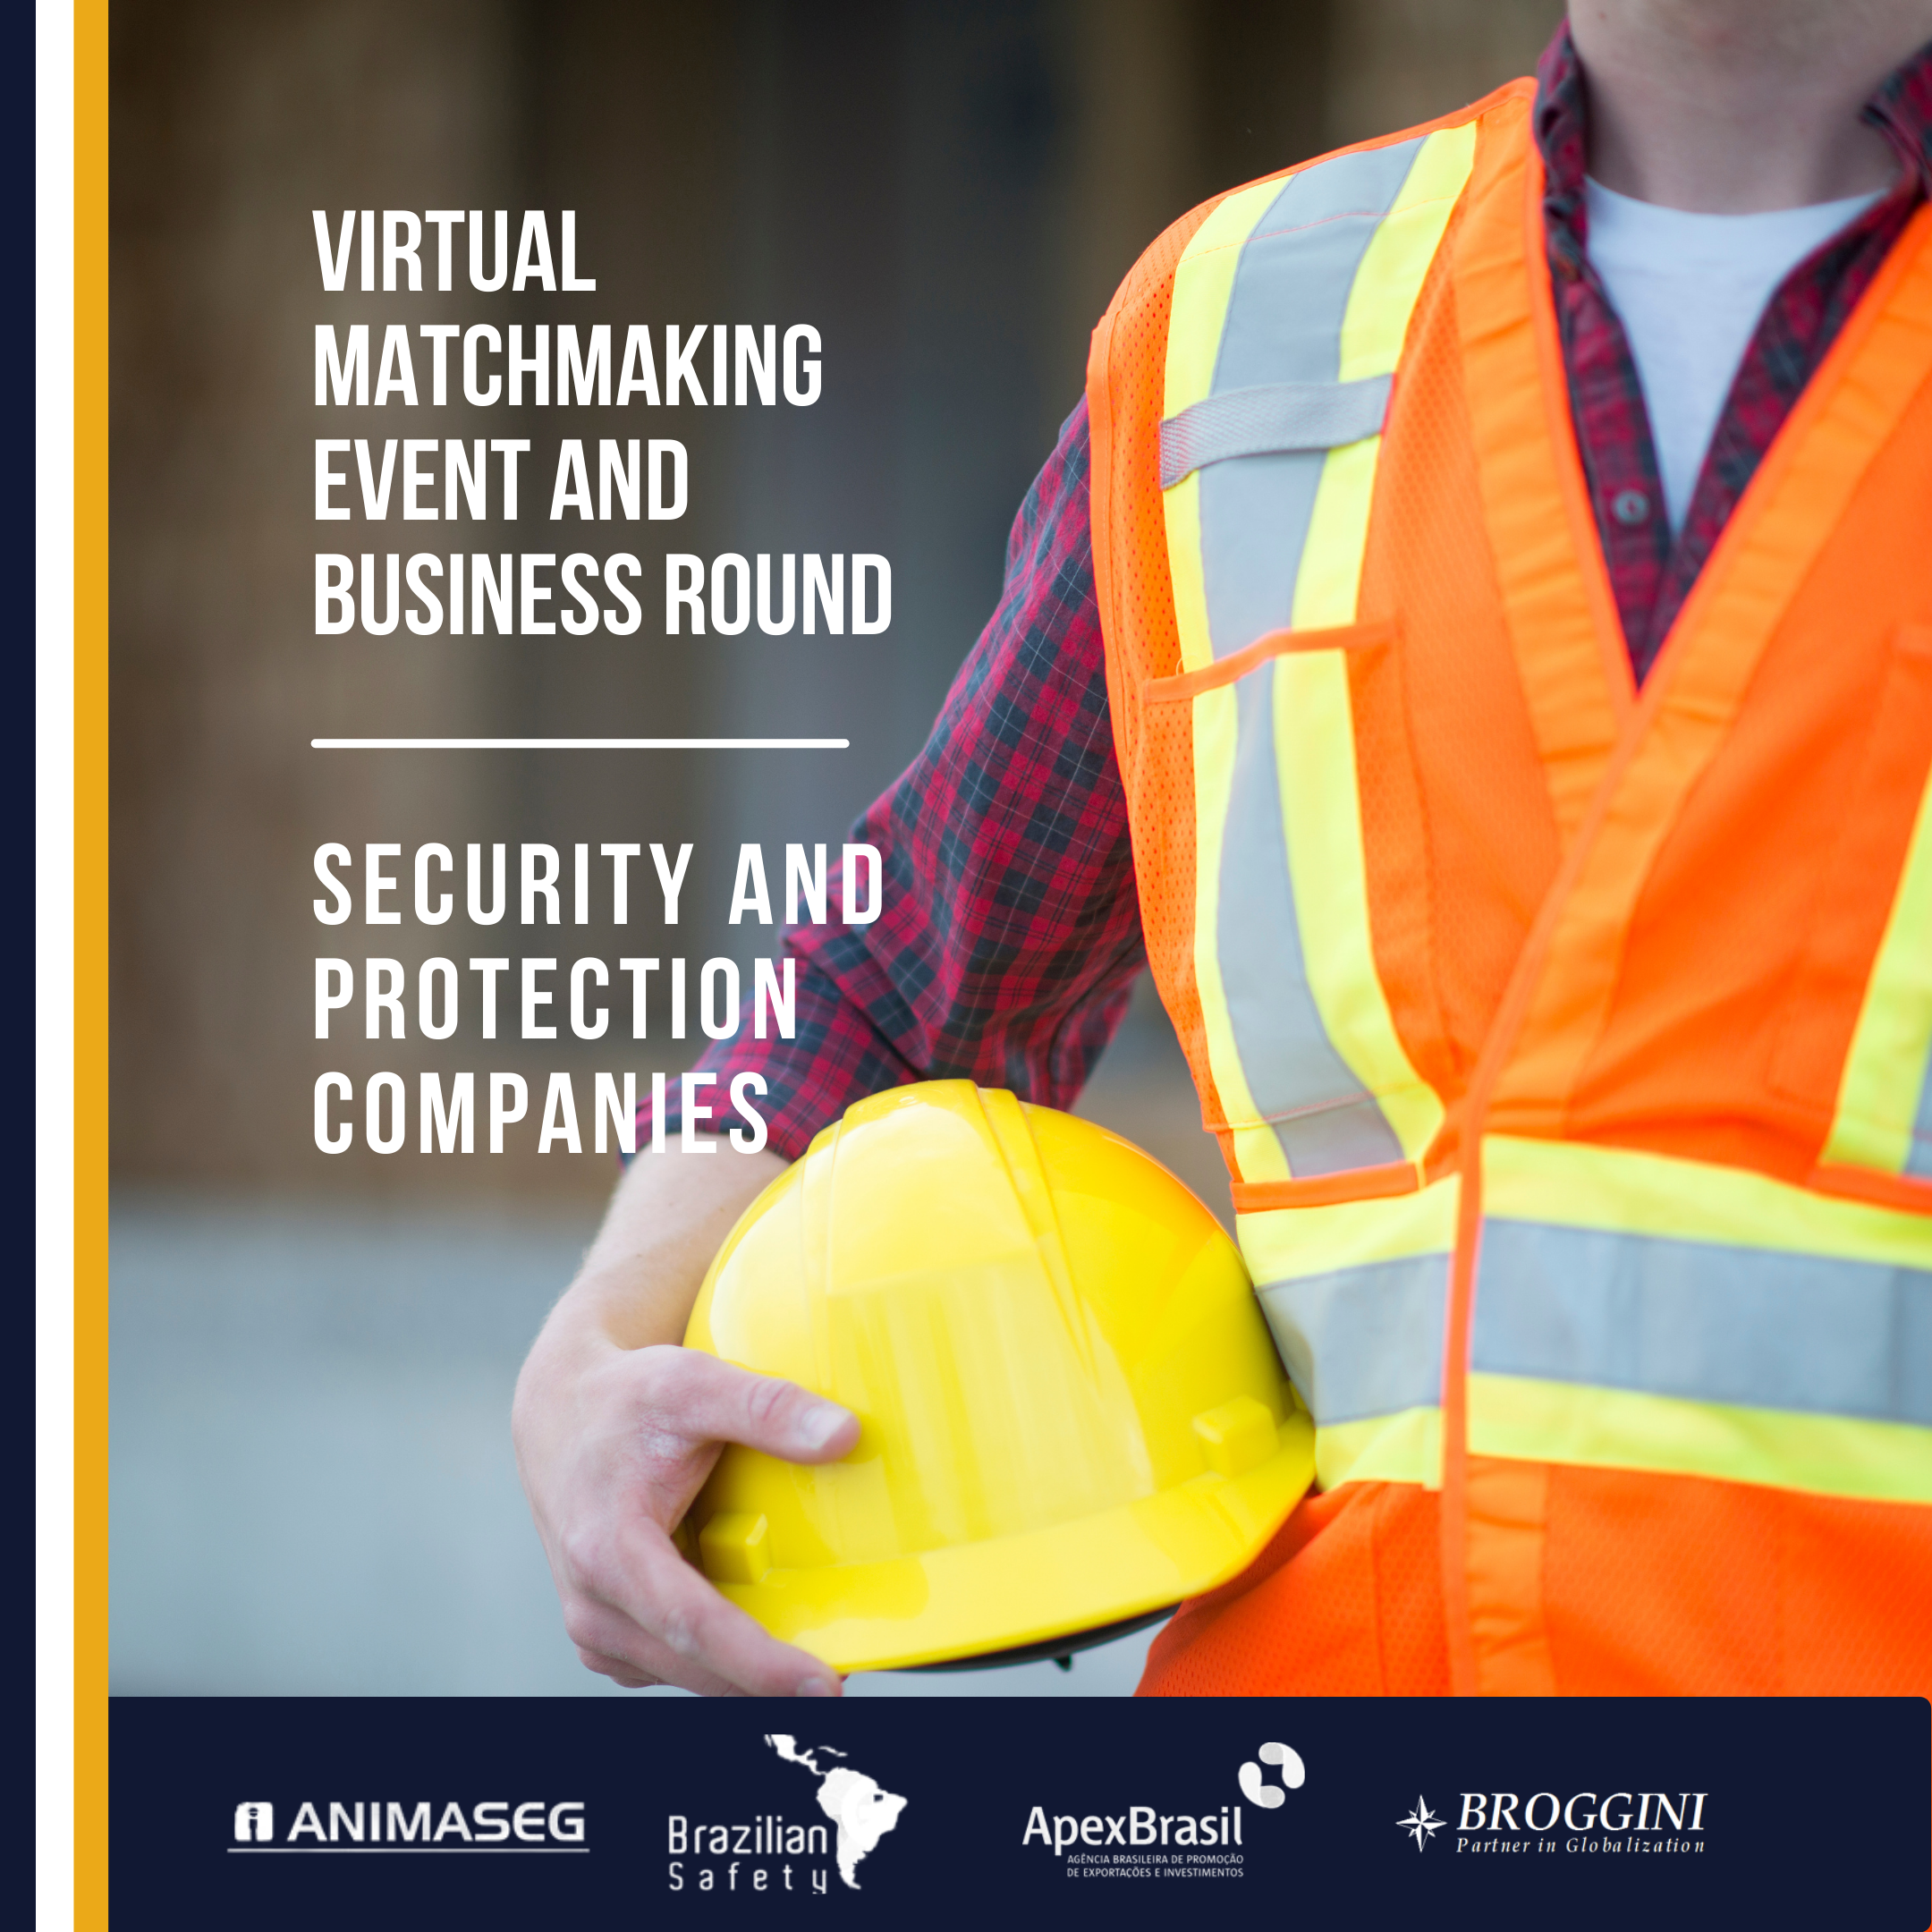 Virtual Matchmaking Event: Security and Protection Companies